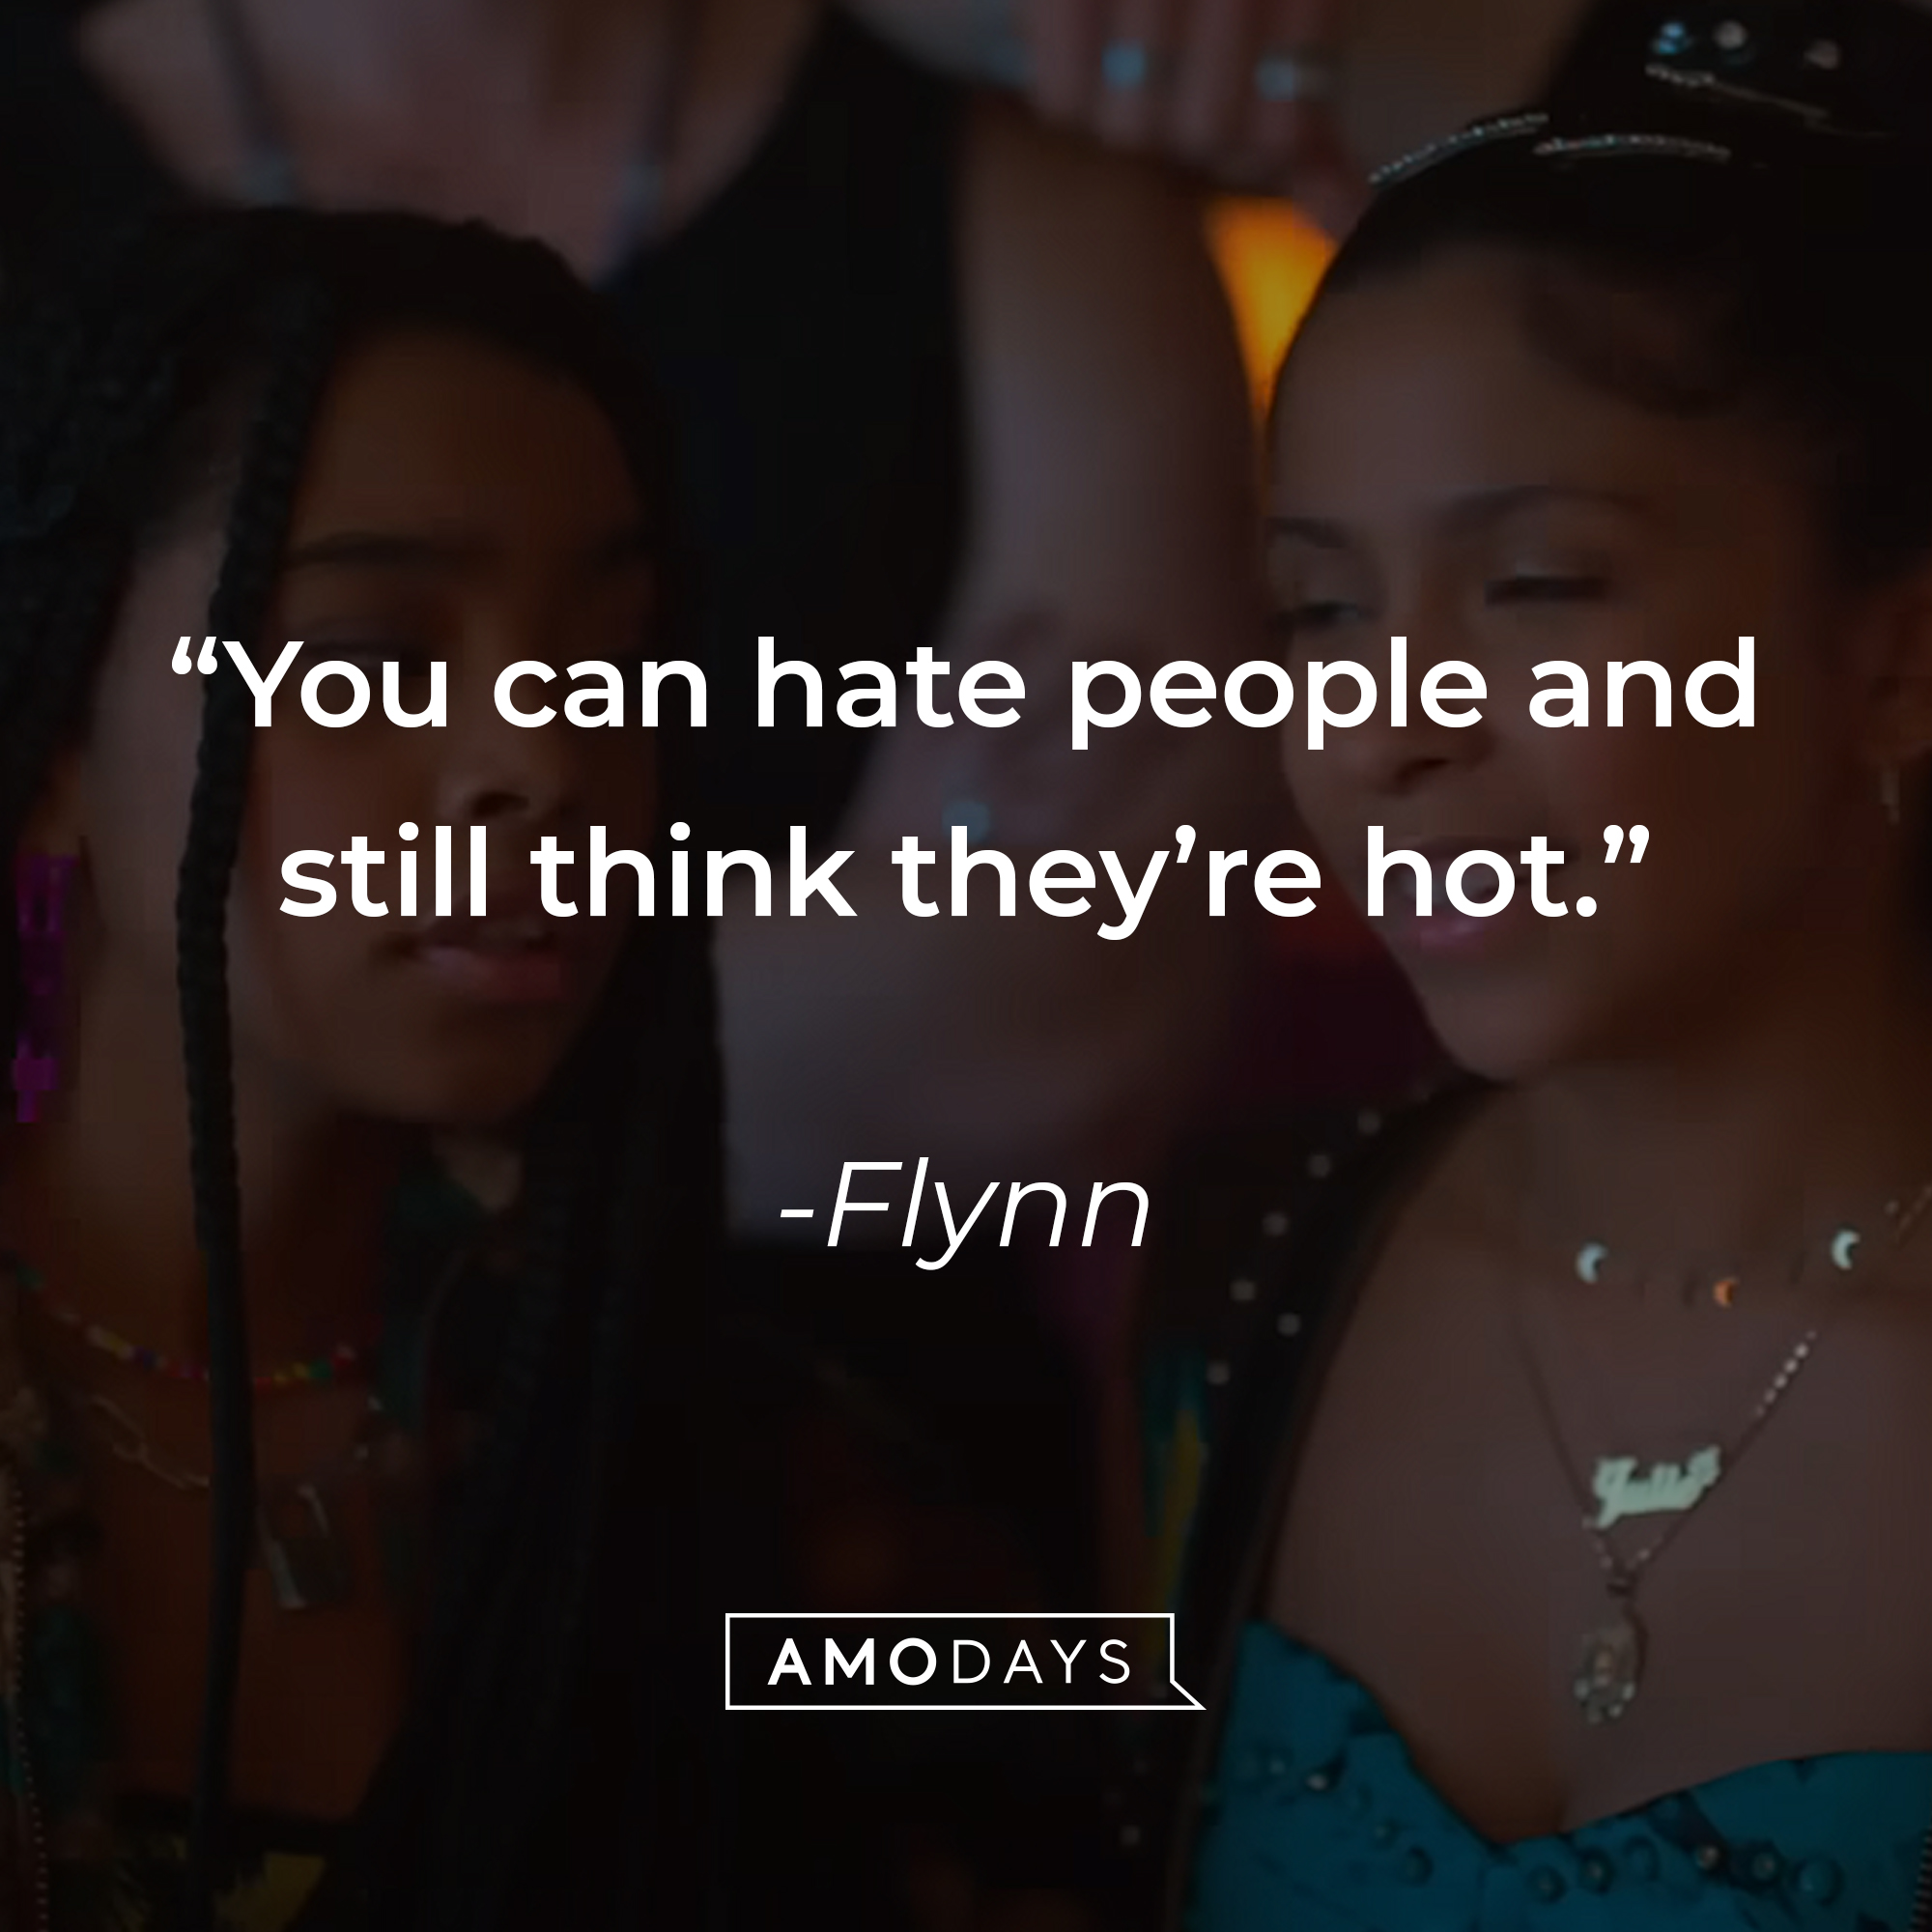 An image of characters from “Julia and the Phantoms” band with Flynn’s quote: You can hate people and still think they’re hot.” | Source: youtube.com/netflixafterschool